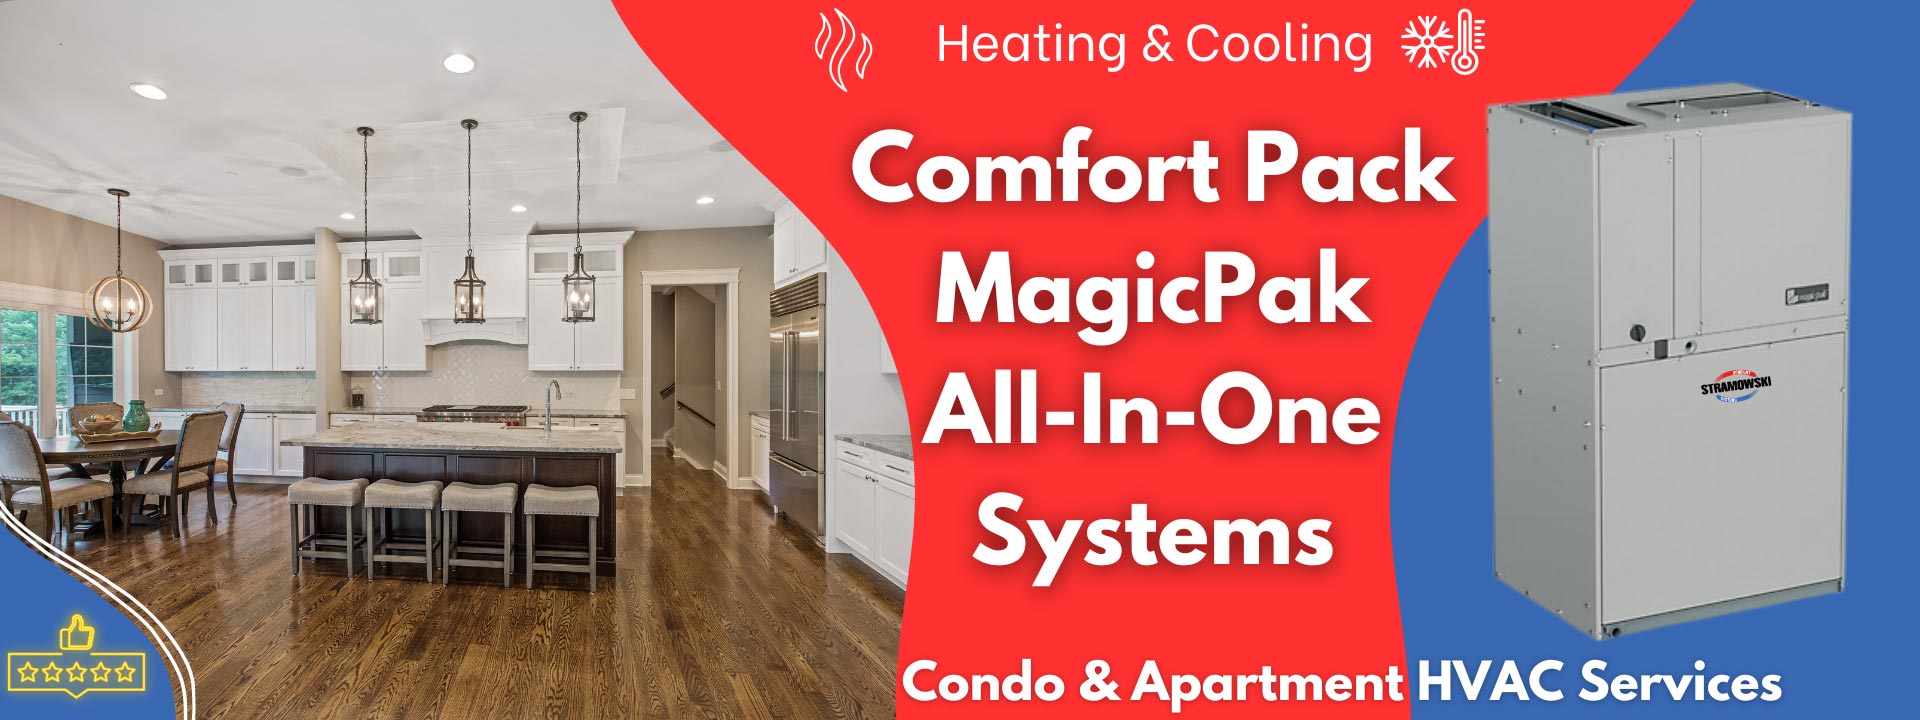 MagicPak - Comfort Pack All-in-One Systems